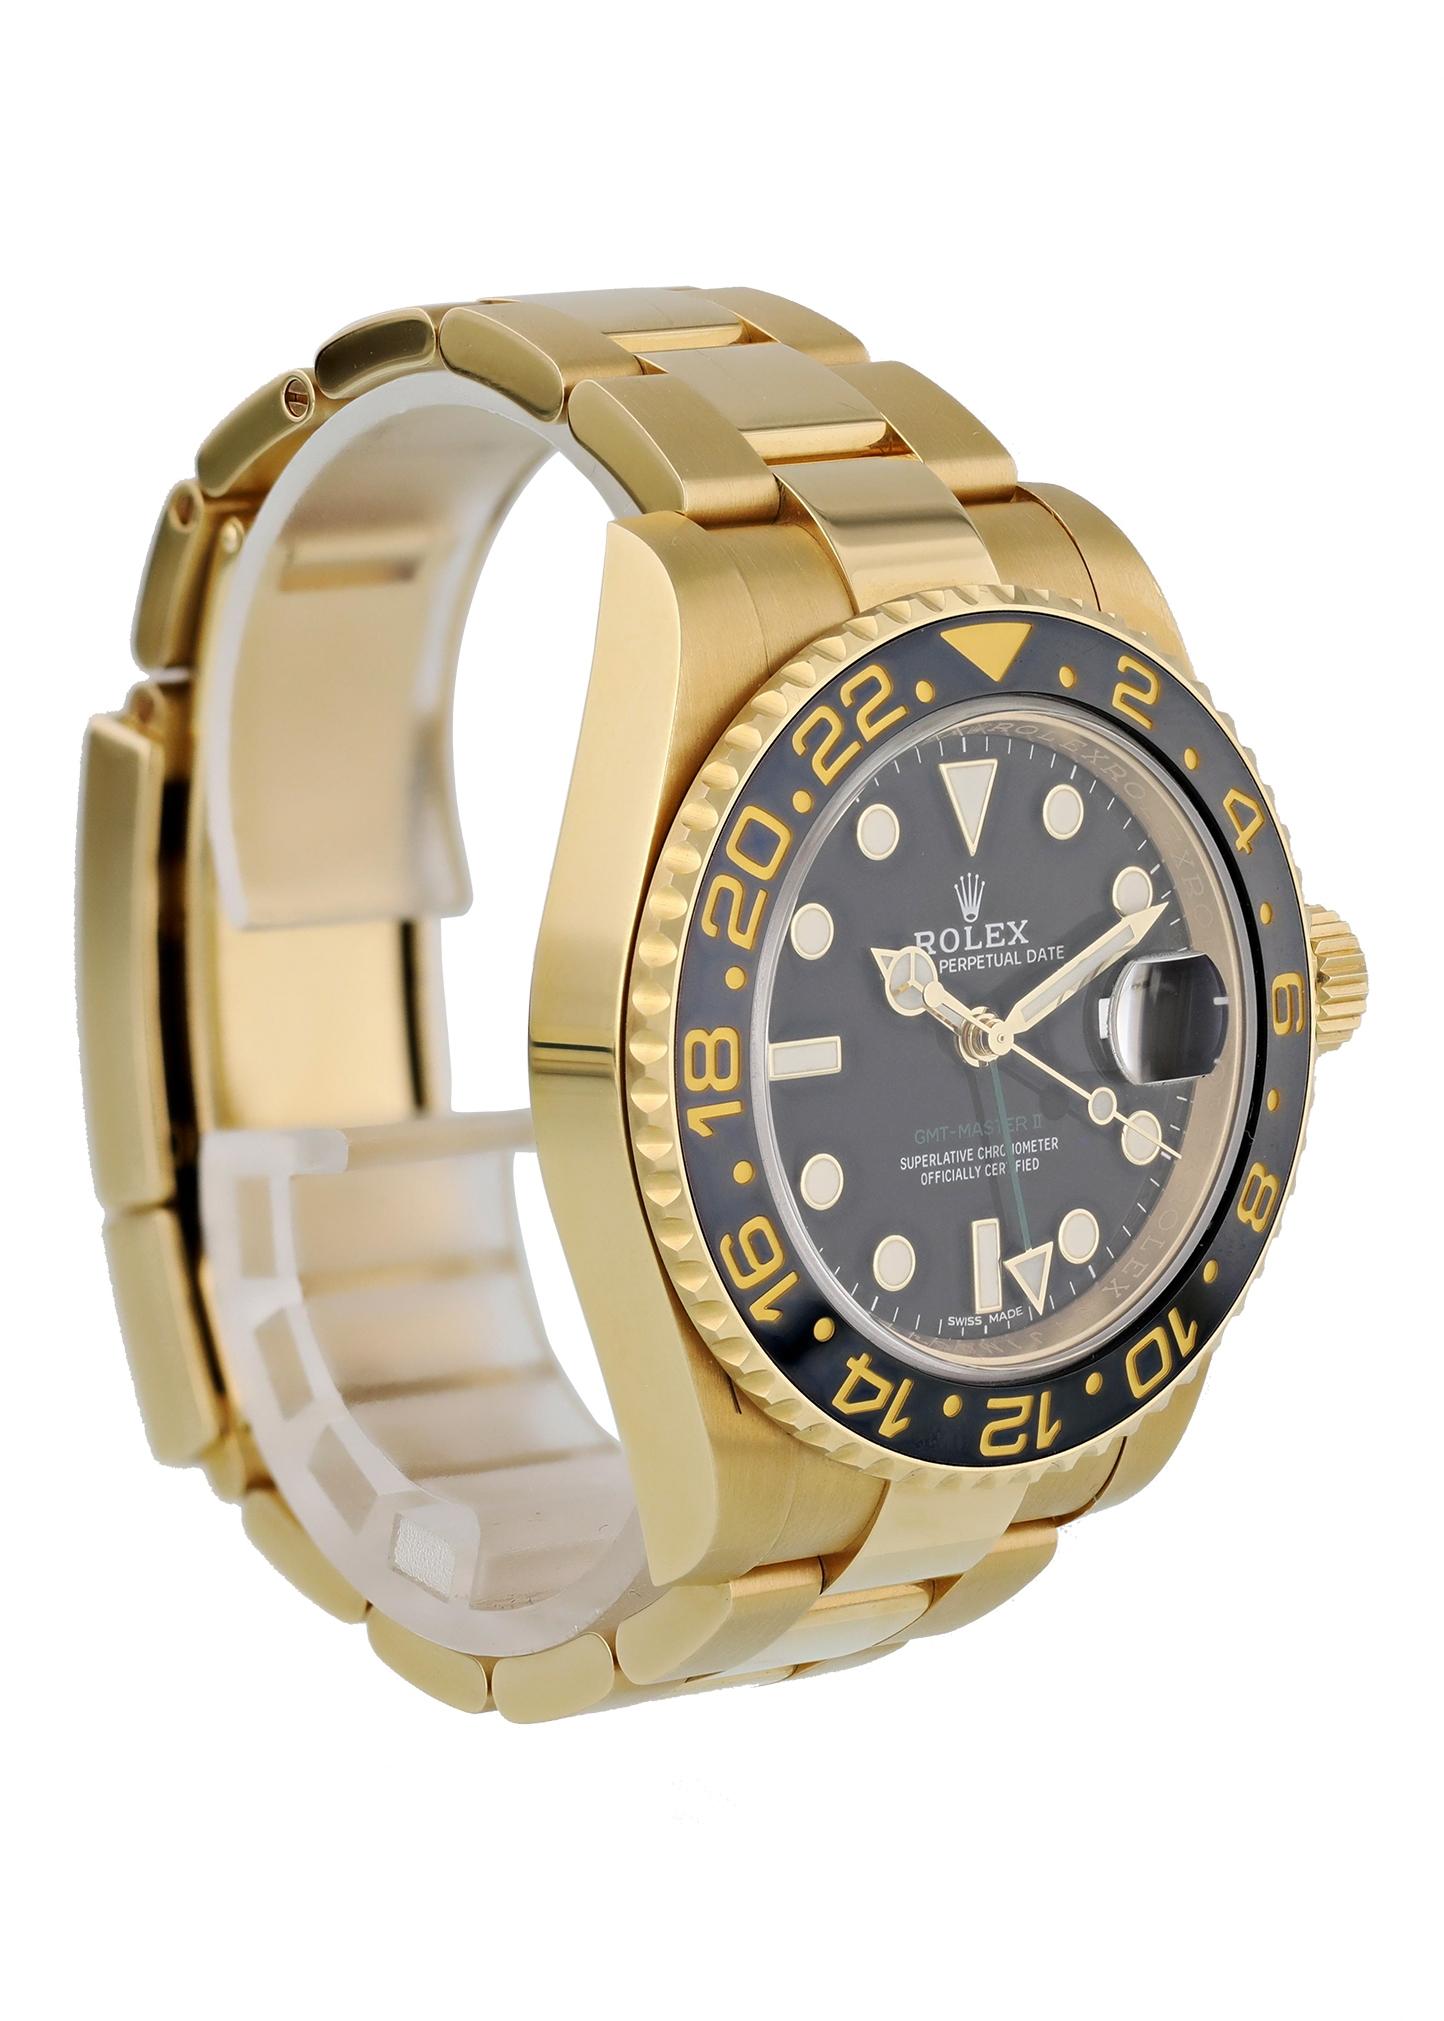 Rolex GMT-Master II 116718 Men Watch. 
40mm 18k Yellow Gold case. 
Yellow Gold Bidirectional bezel. 
Black dial with luminous hands and markers. 
Yellow Gold Oyster bracelet with Fold Over Clasp With Safety. 
Will fit up to a 7.5-inch wrist.